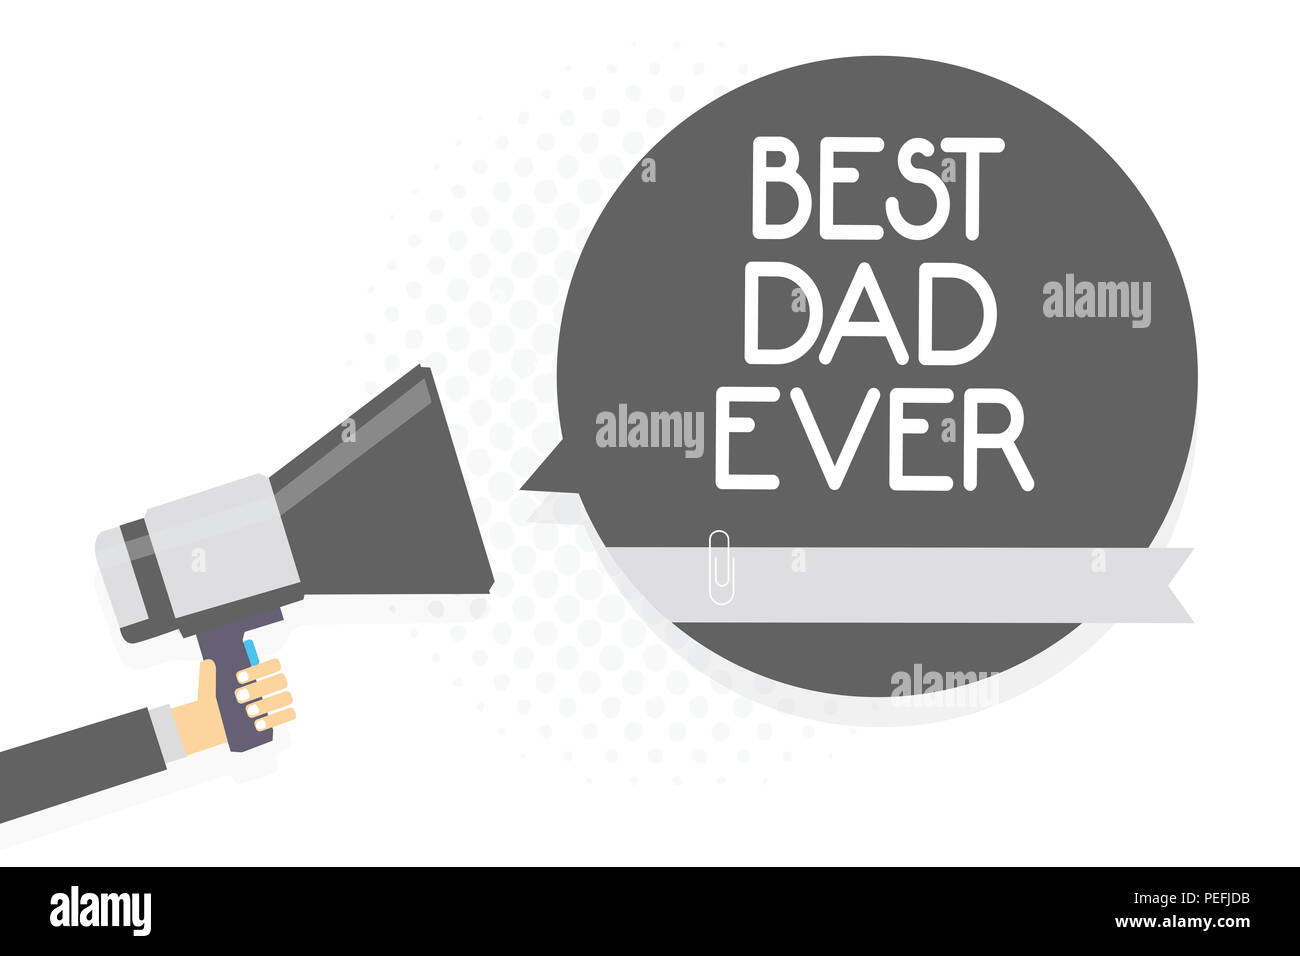 Word writing text Best Dad Ever. Business concept for Appreciation for your father love feelings compliment Man holding megaphone loudspeaker gray spe Stock Photo